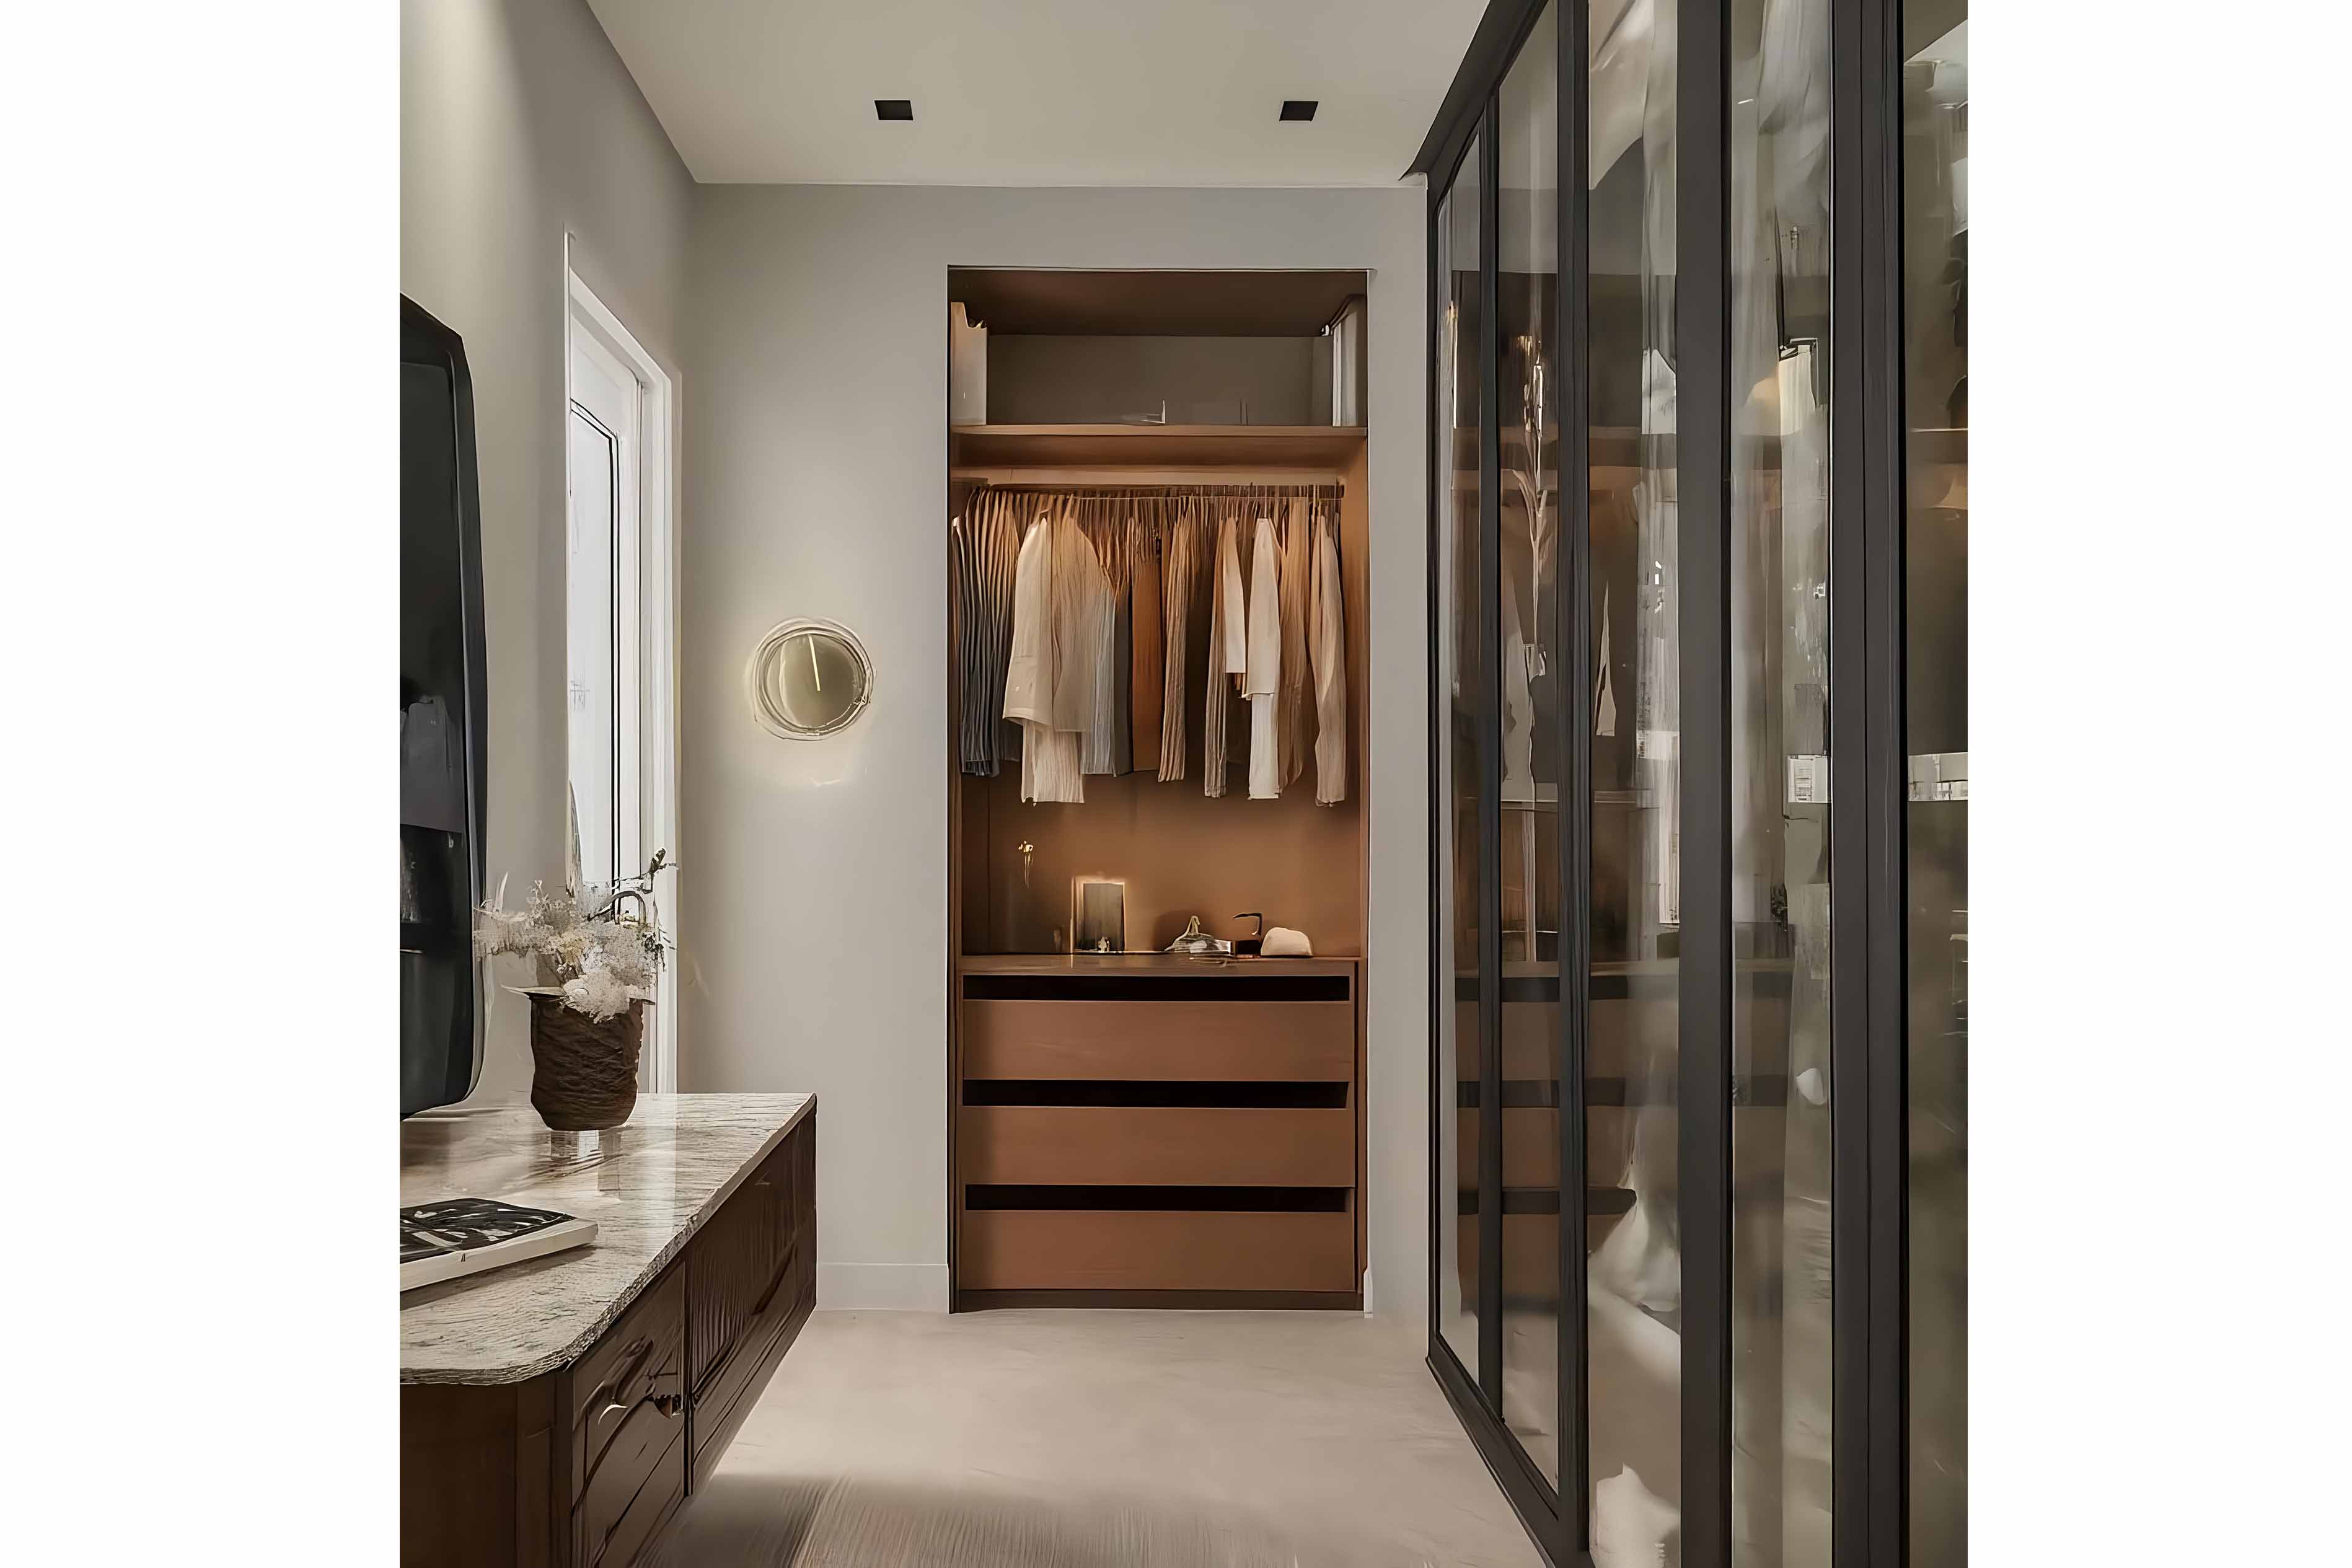 001. Bespoke fitted wardrobes his hers dressing room mylands farrow and ball armac martin glass doorless hanging en suite near Winchester Hampshire